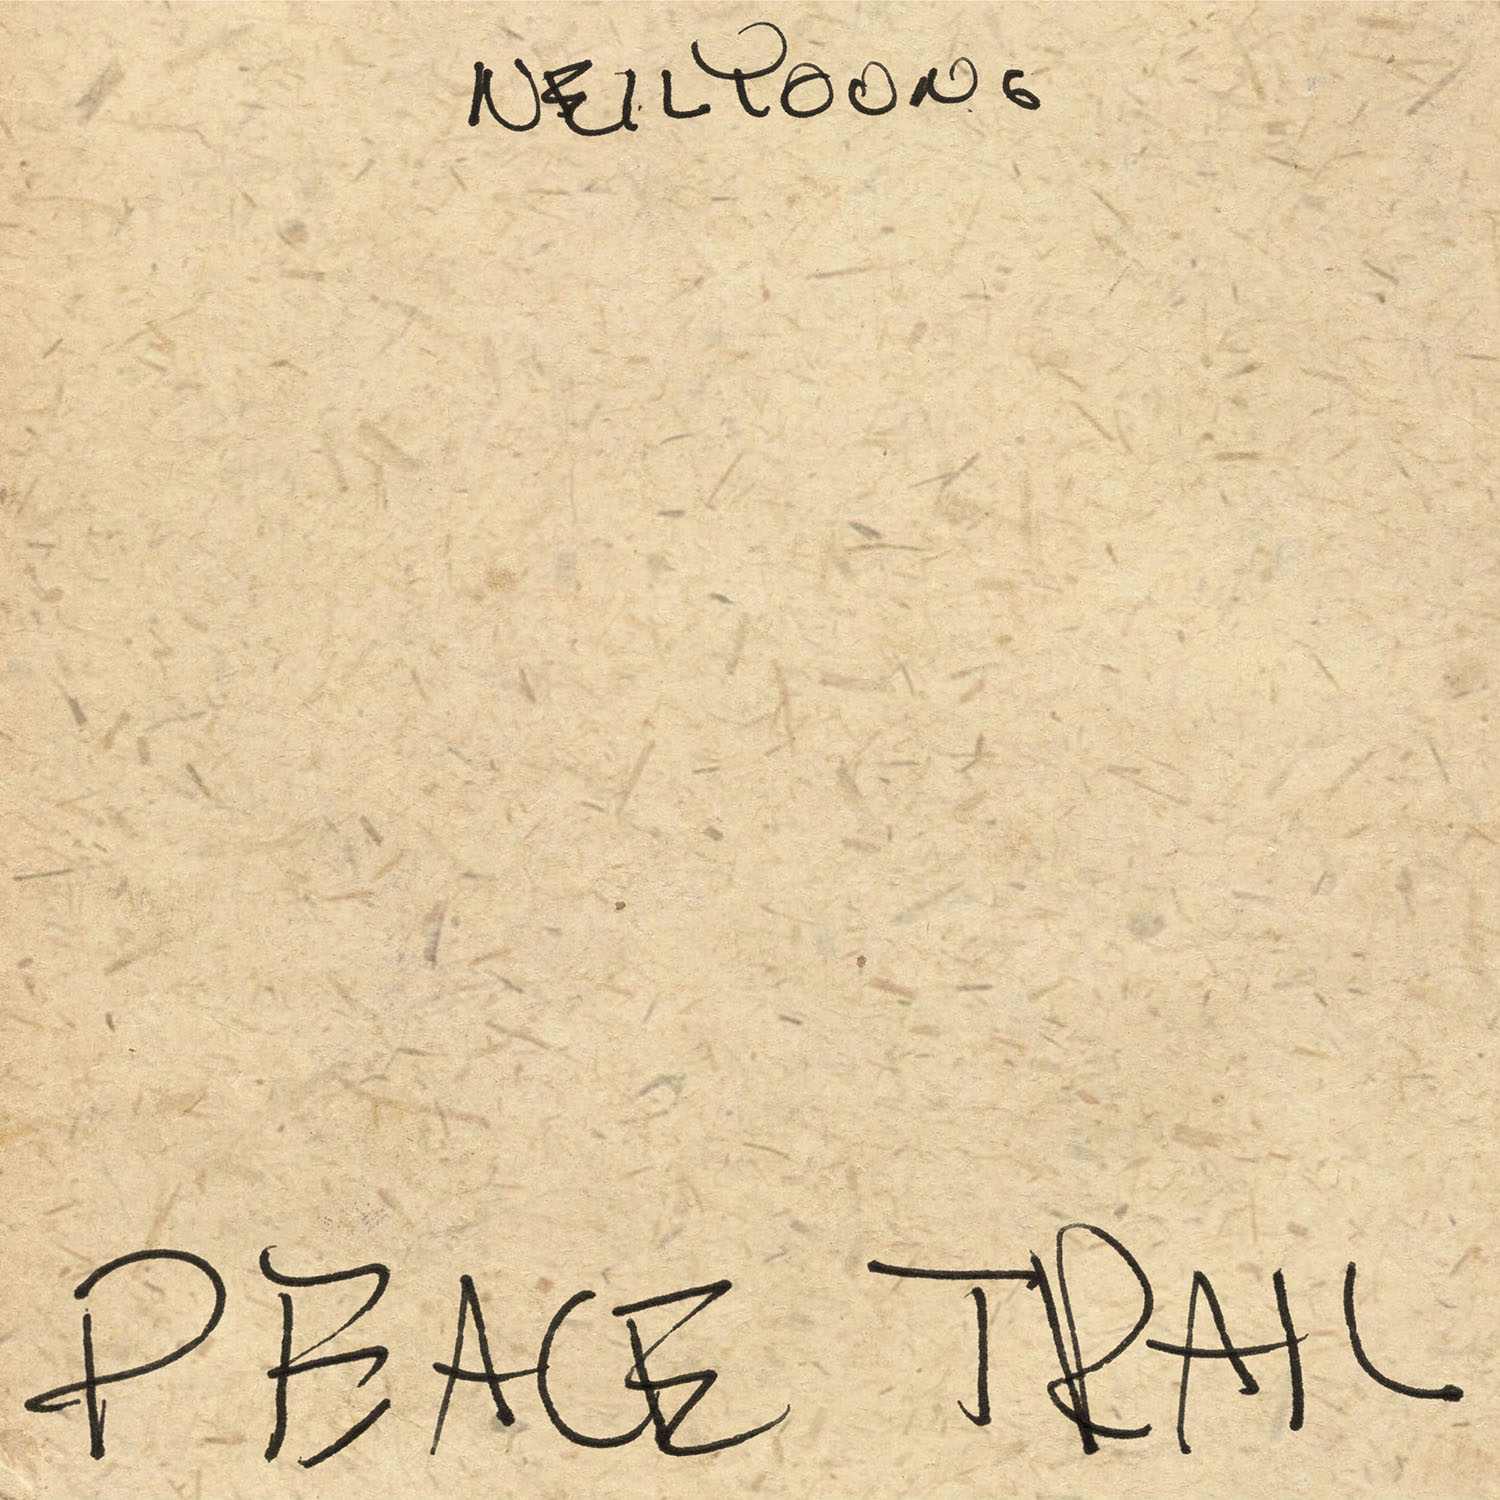 Image result for neil young peace trail